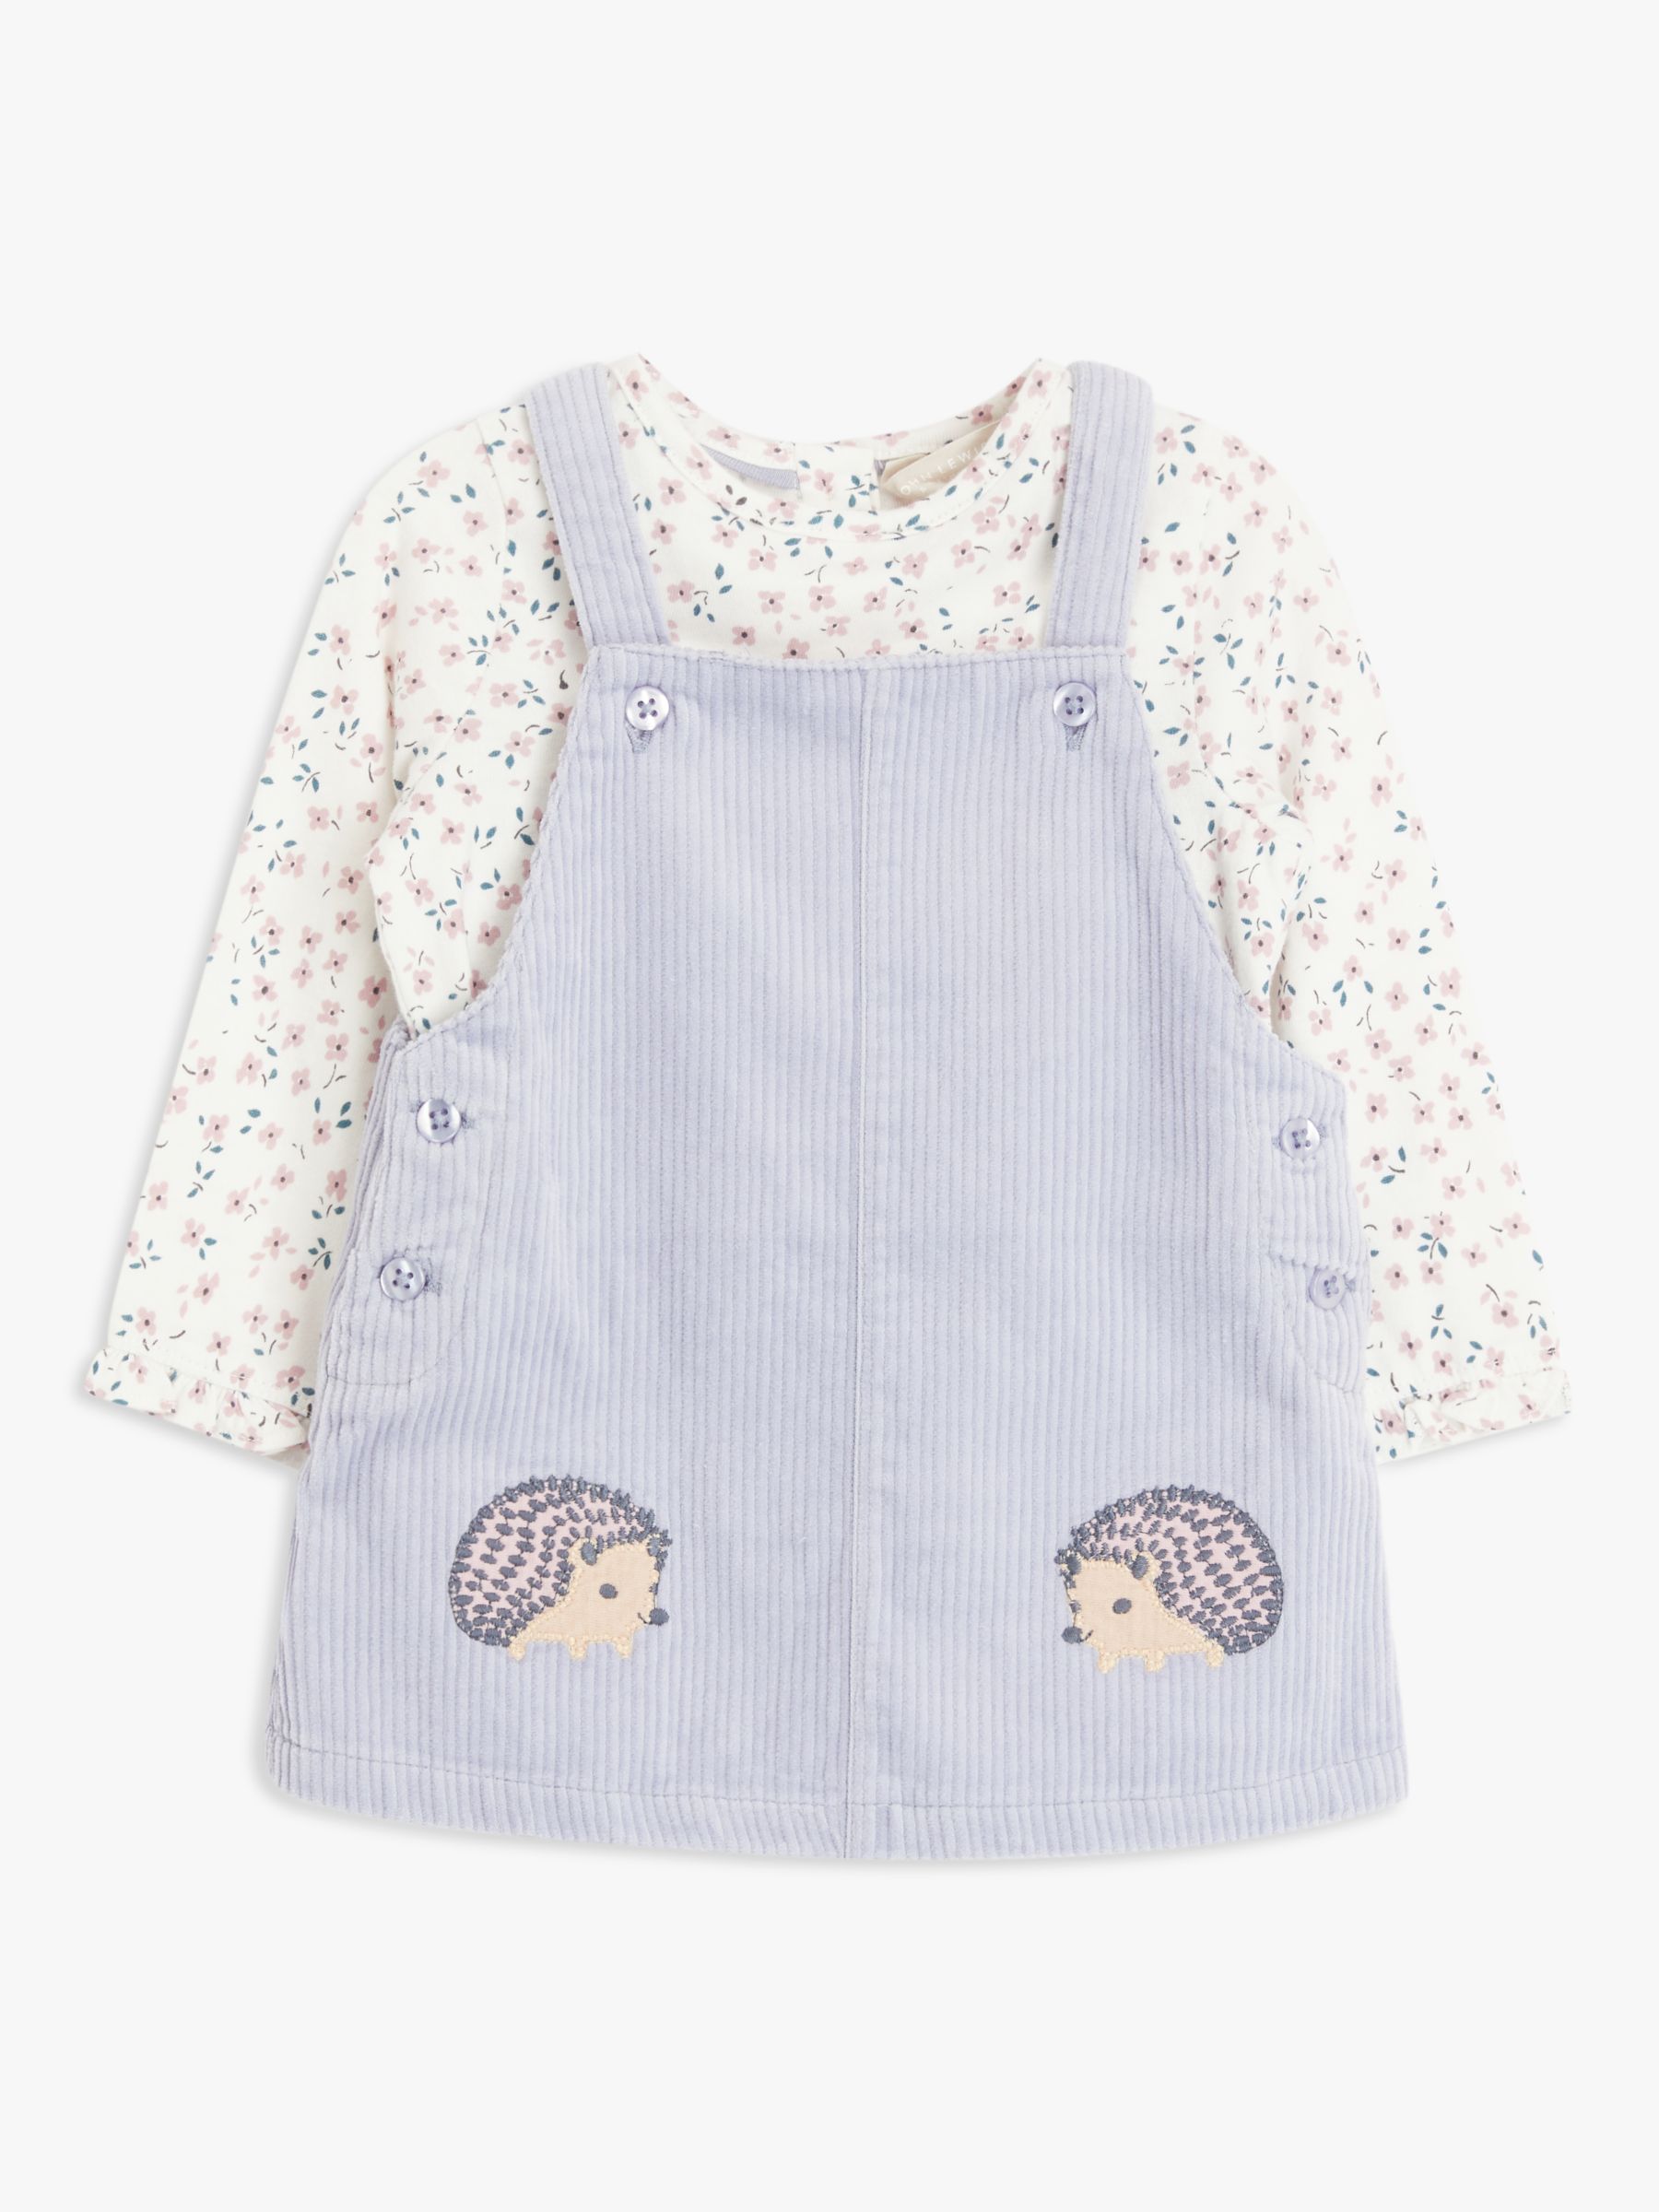 Mothercare Mothercare Floral Dress Aged 12-18 Months 